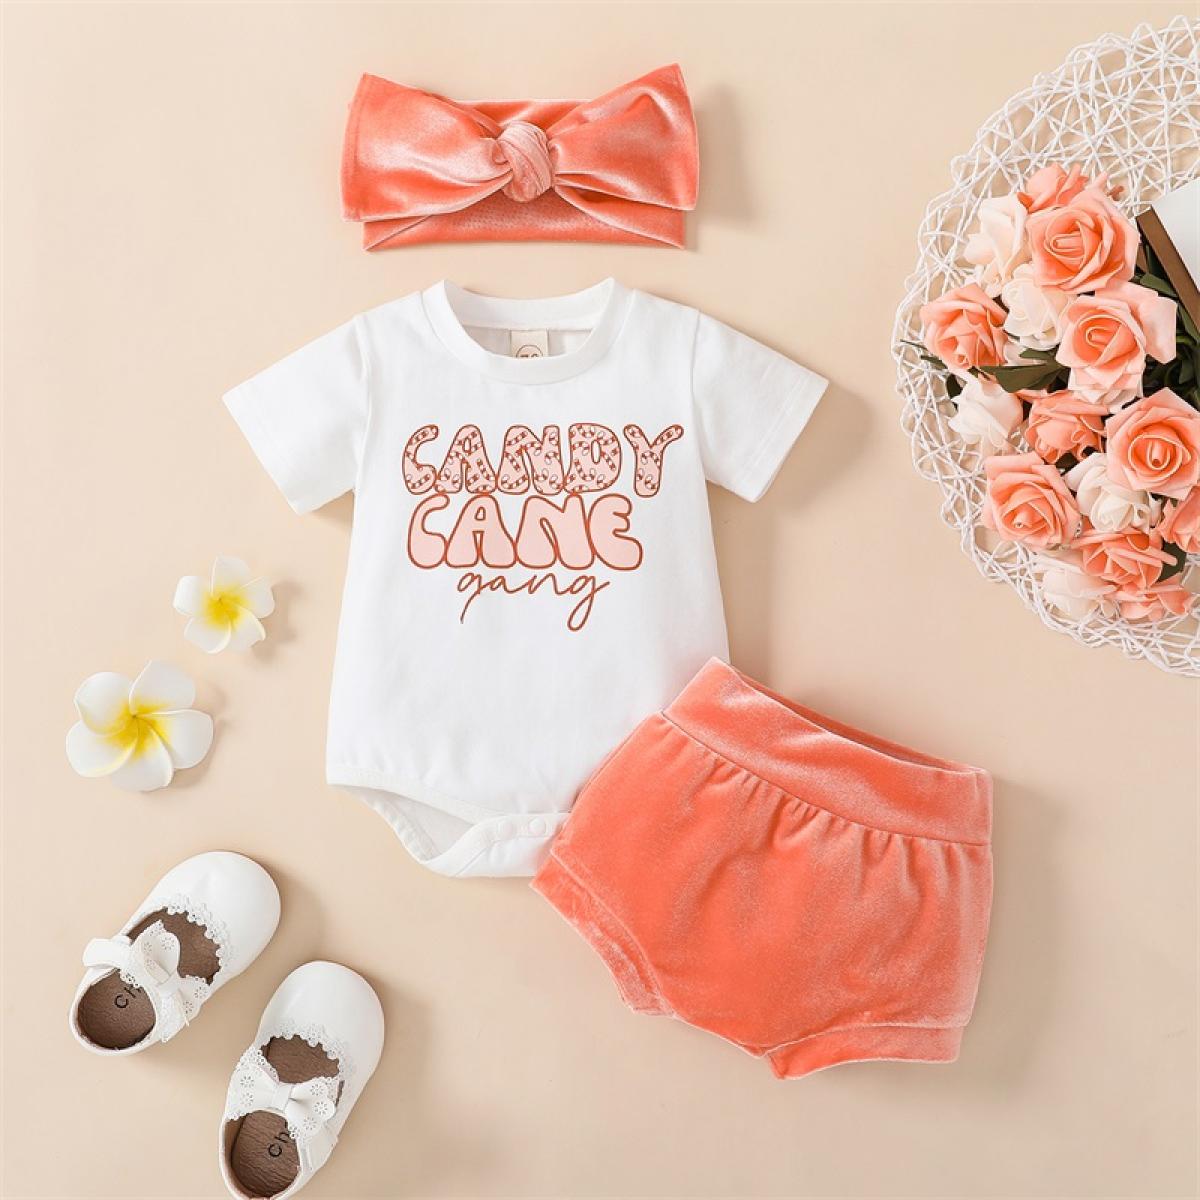 Sunsiom Kid Girl Clothes Suit Short Sleeve Round Neck Letters Romper Tops +  Short Pants Outfit + Headband 3pcs Color White Kid Size 3M